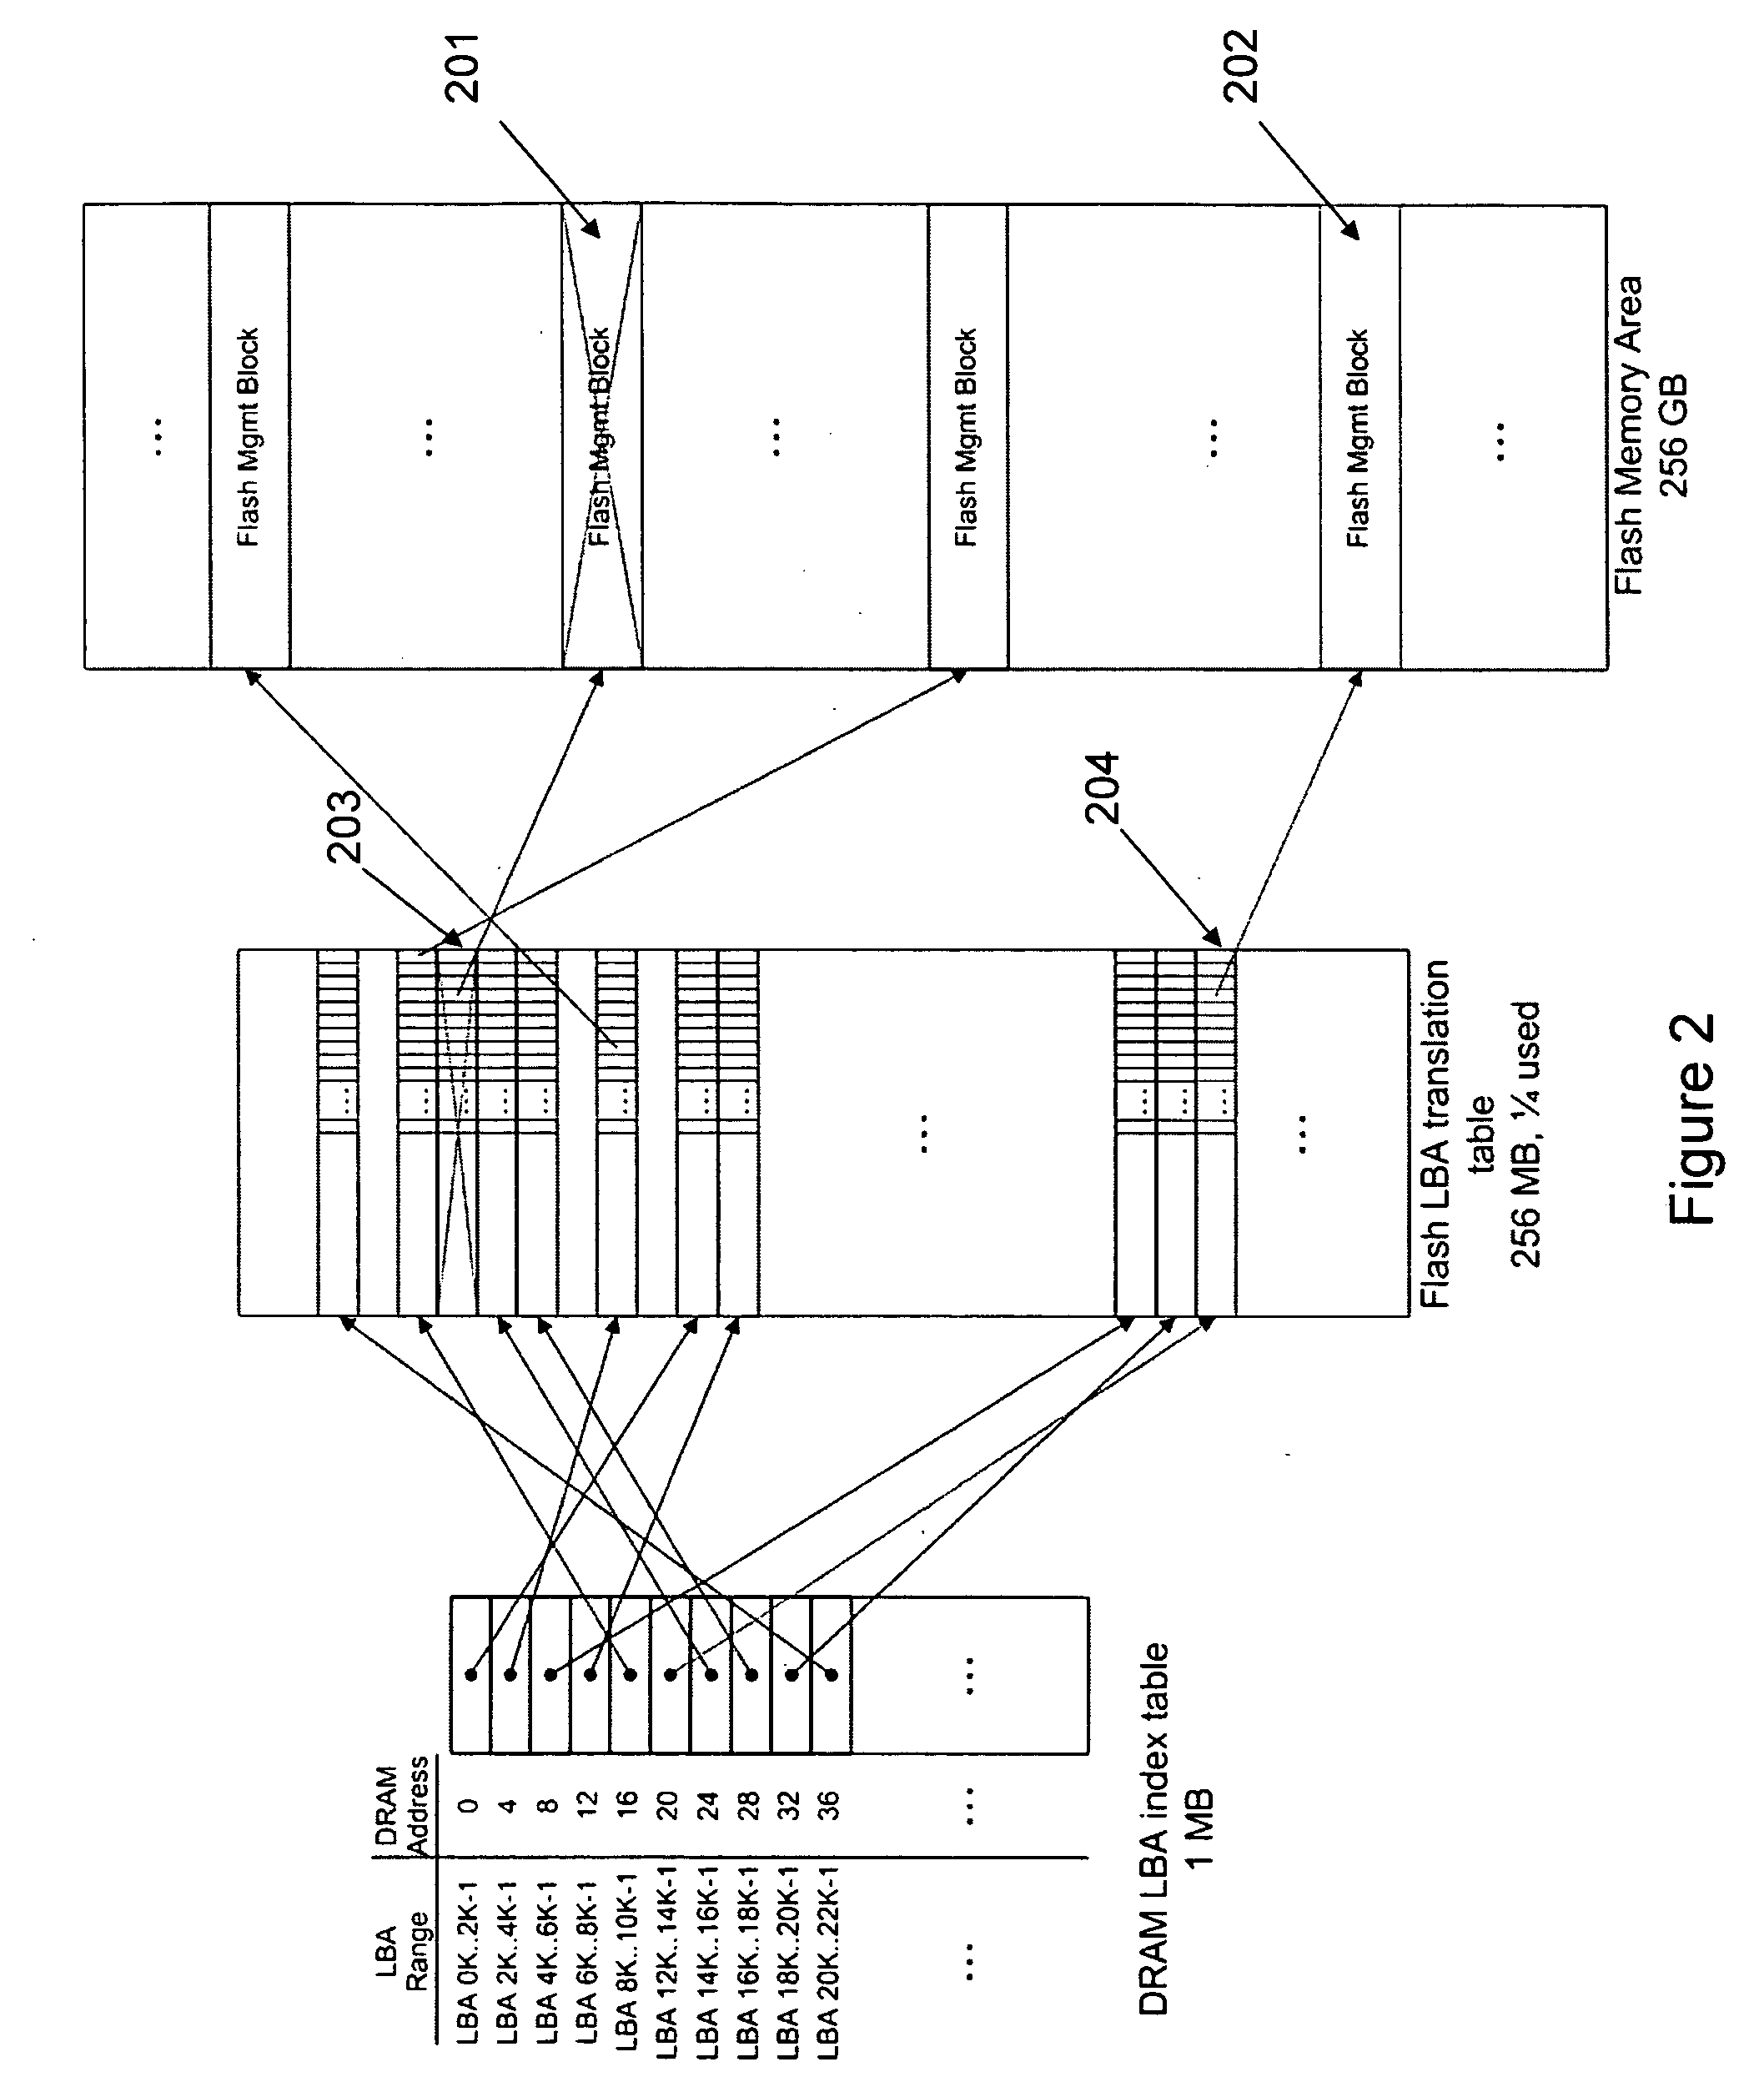 Process and Method for Logical-to-Physical Address Mapping in Solid Sate Disks